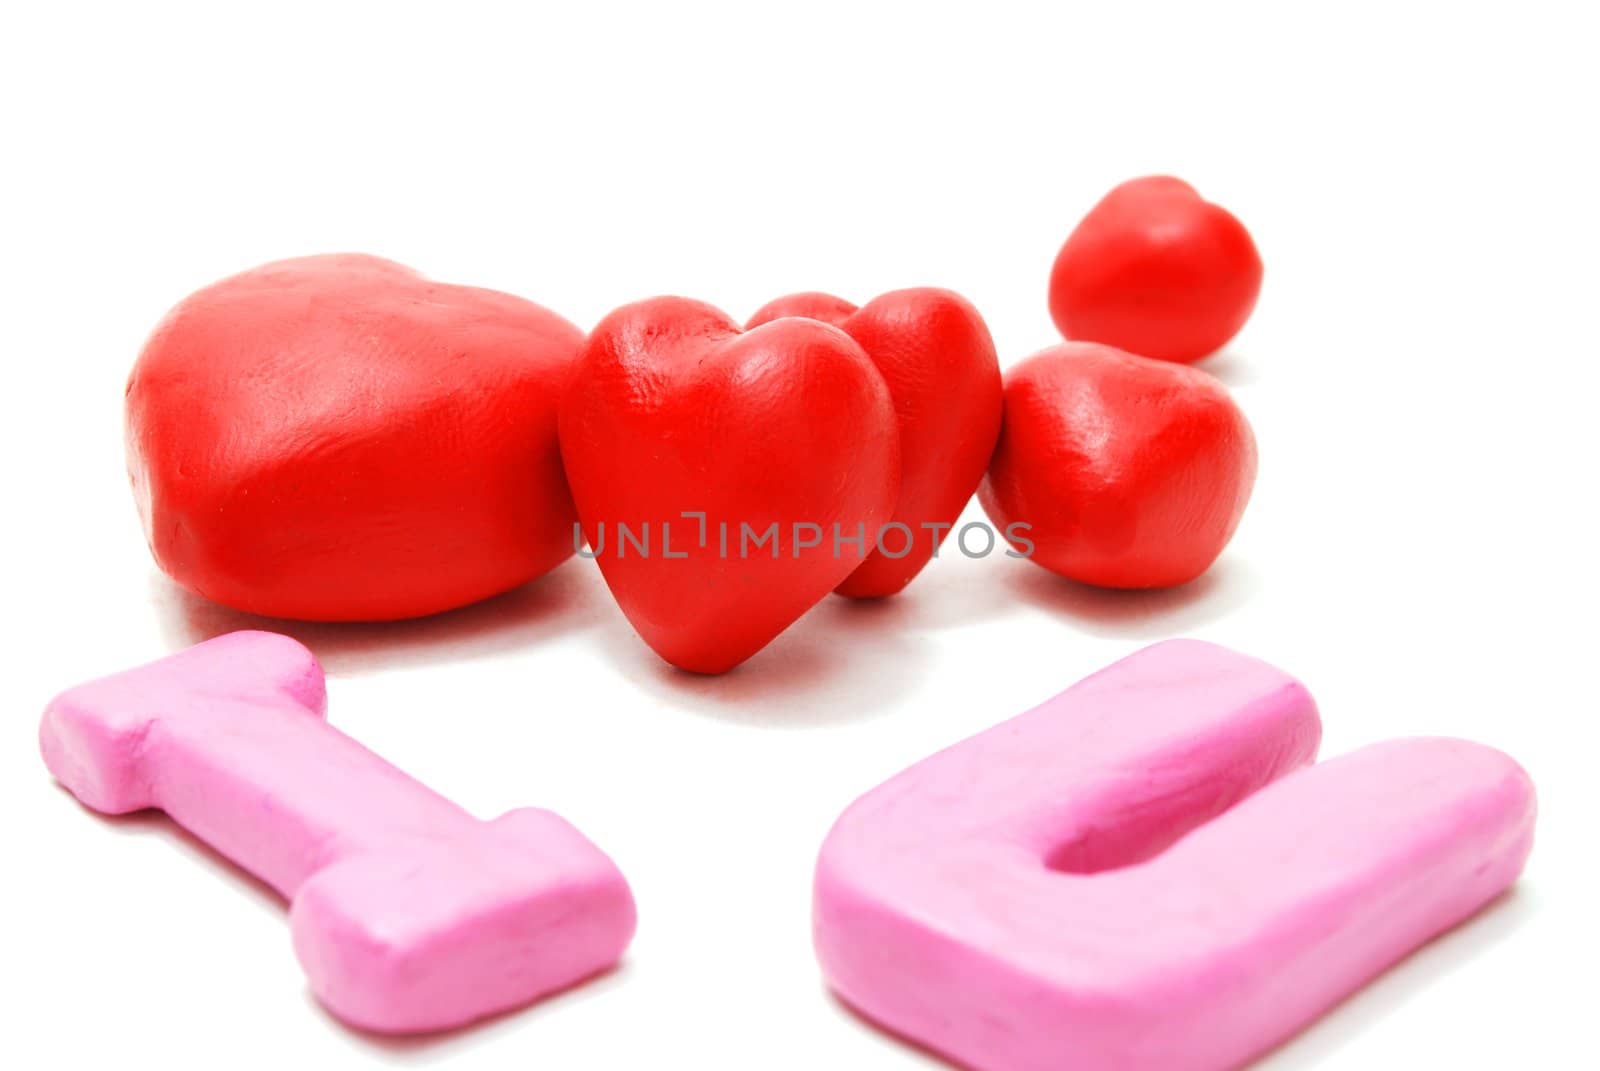 Random Valentine's I Love You Text with Heap of Hearts Made of Red and Pink Plasticine Isolated on White Background